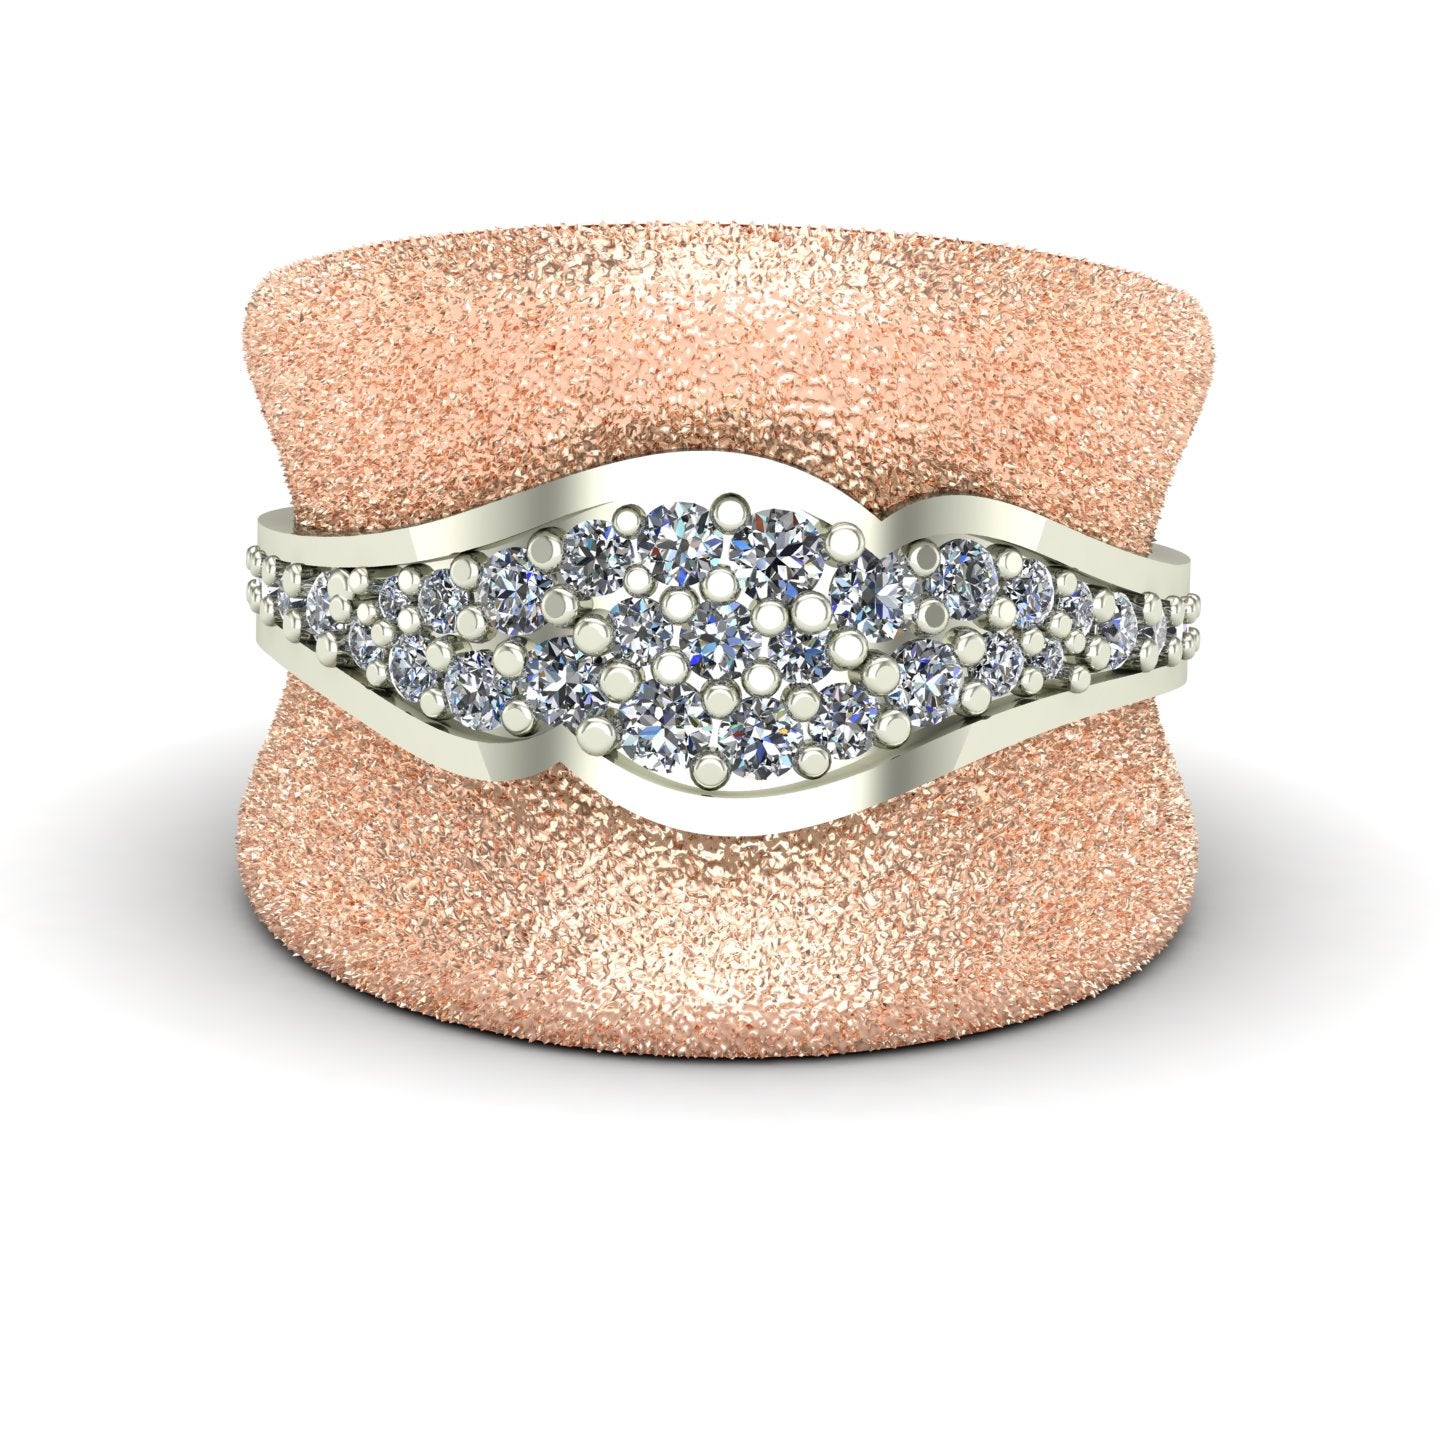 diamond pave cigar band two tone ring in 14k rose and white gold - Charles Babb Designs - top view